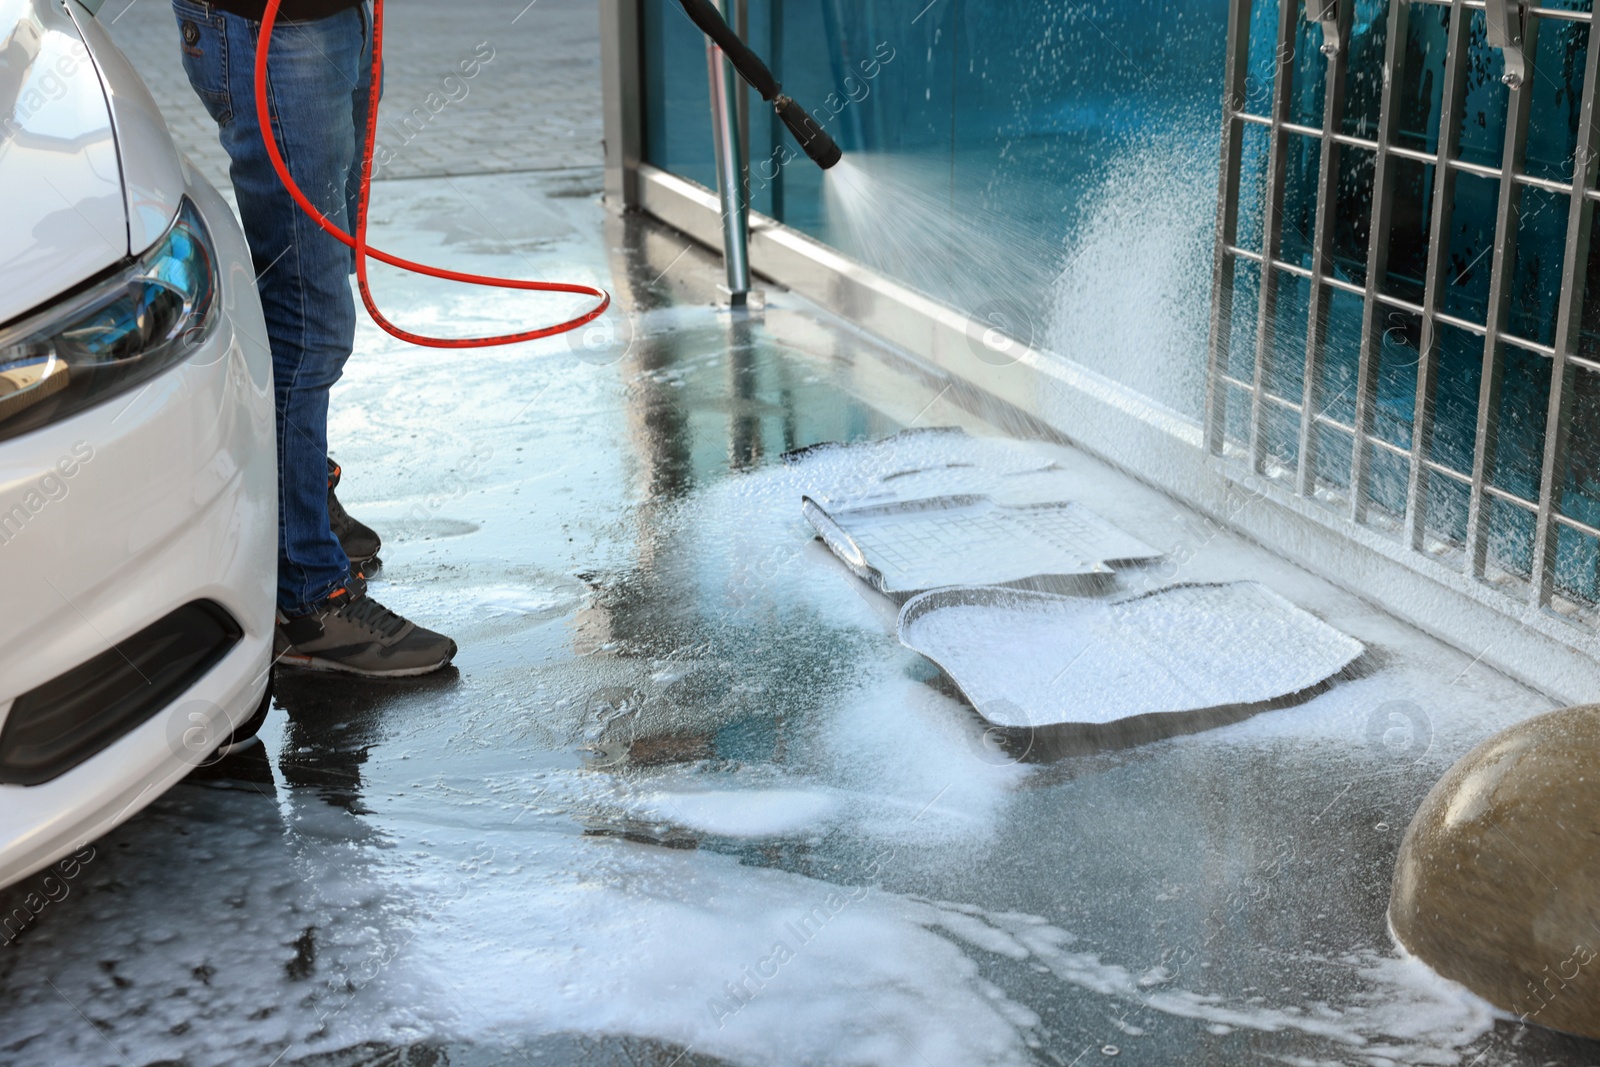 Photo of Man cleaning auto mats with high pressure foam jet at self-service car wash, closeup